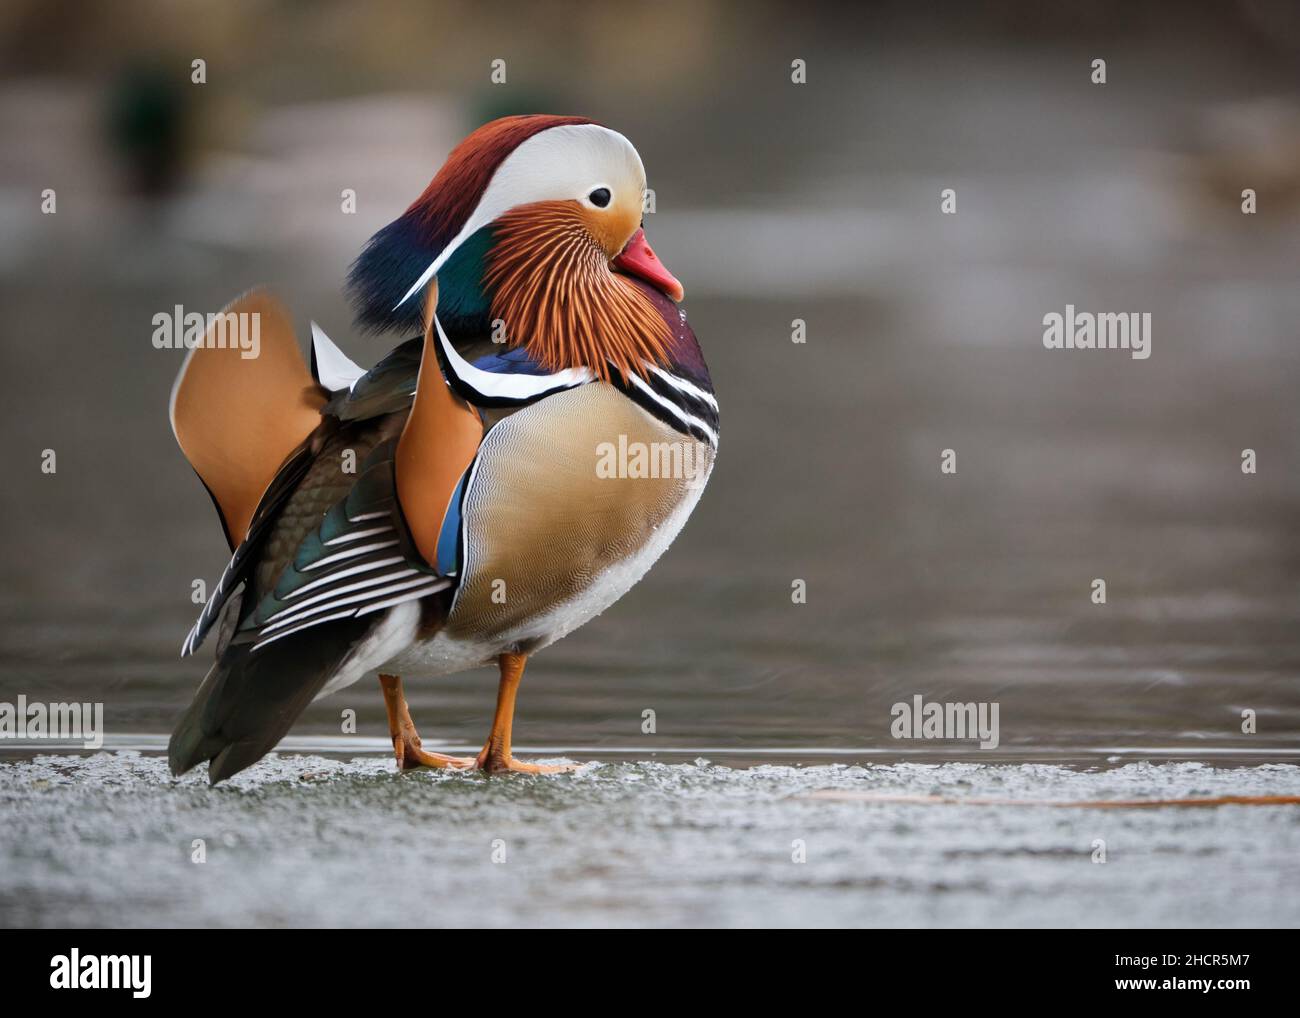 Mandarin Duck, Aix galericulata, having escaped captivity standing on winter ice. Profile view displaying back feathers Stock Photo